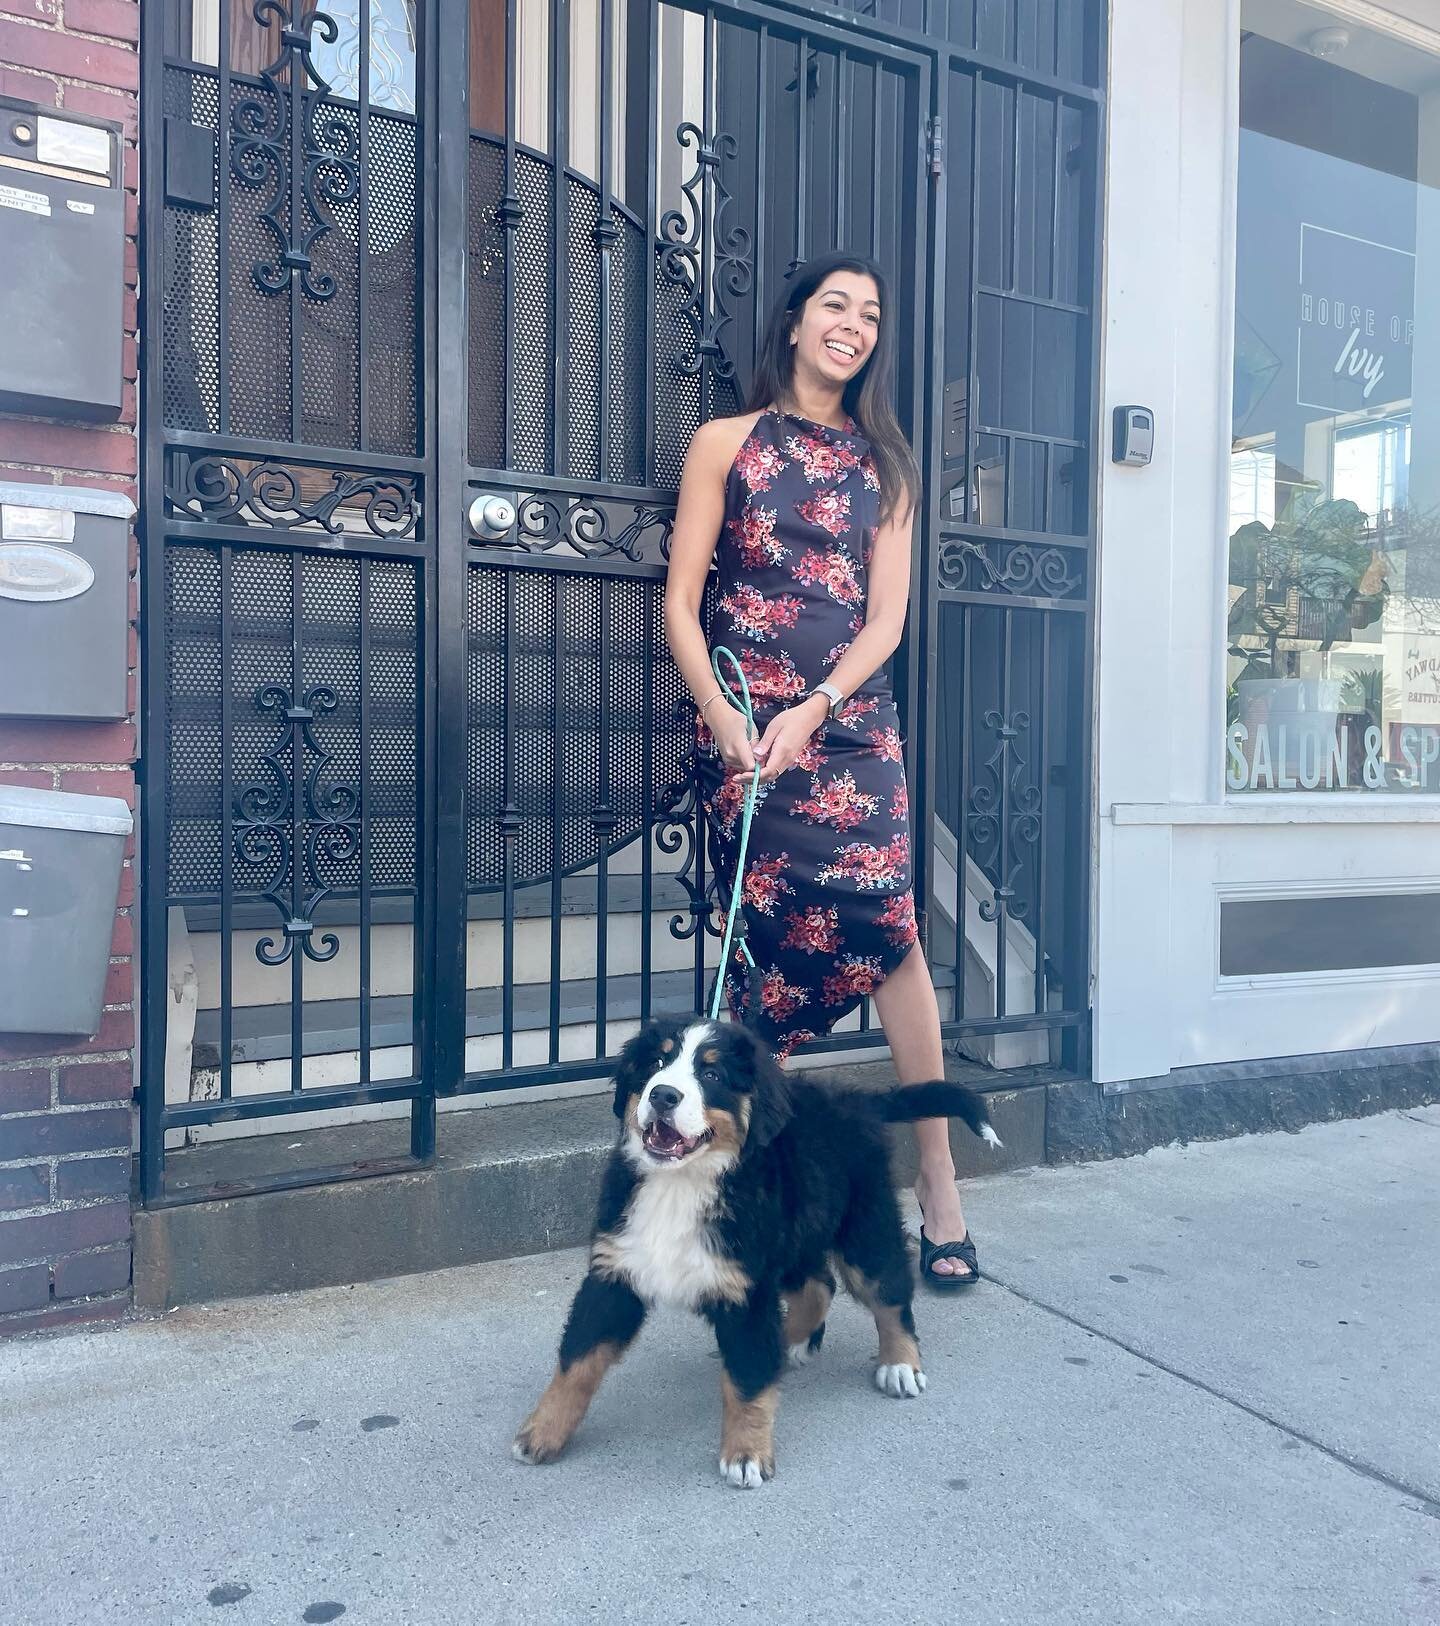 Strike a pose! 📸 Work that runway! 💃 You know you have the cutest puppies in Southie when you&rsquo;re stopped on the street to take part in a @habitboston photoshoot! Betty Boop makes the most adorable model, don&rsquo;t you think?!l Probably why 